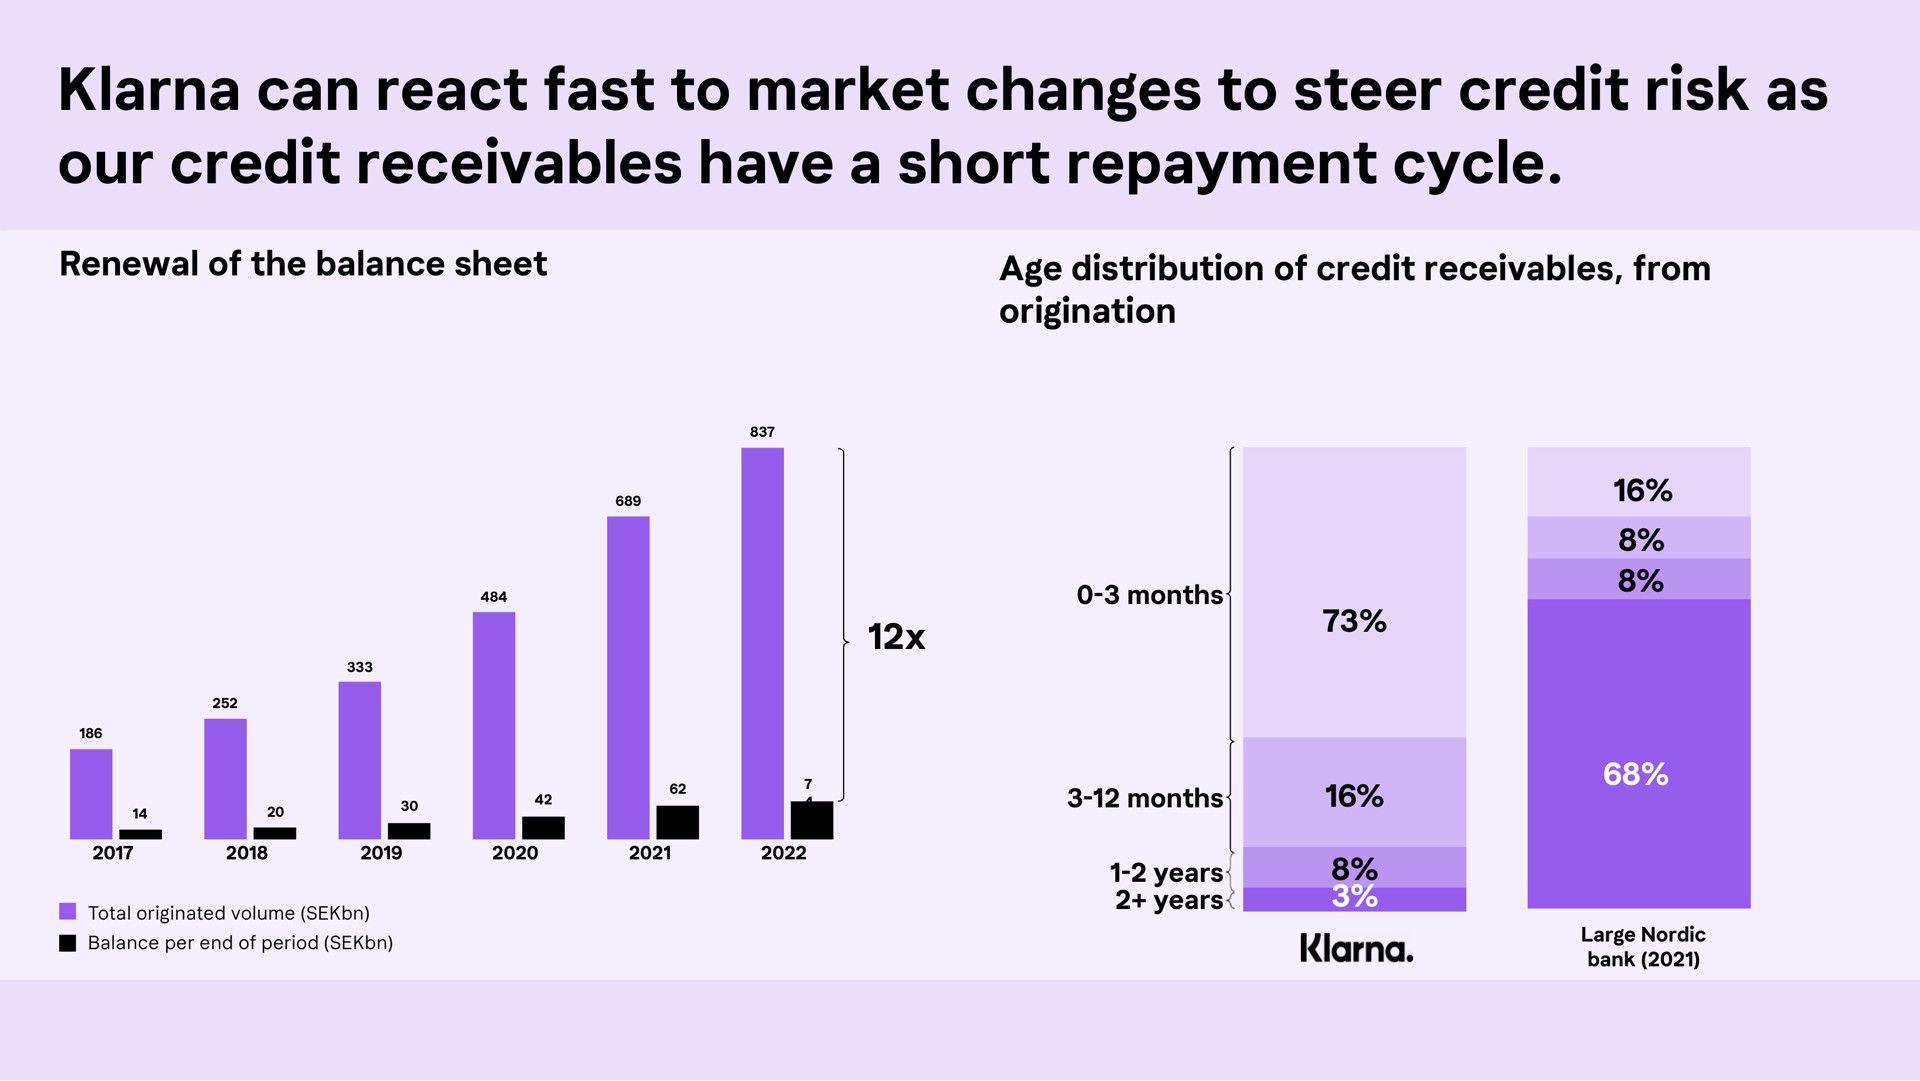 can react fast to market changes to steer credit risk as our credit receivables have a short repayment cycle | Klarna